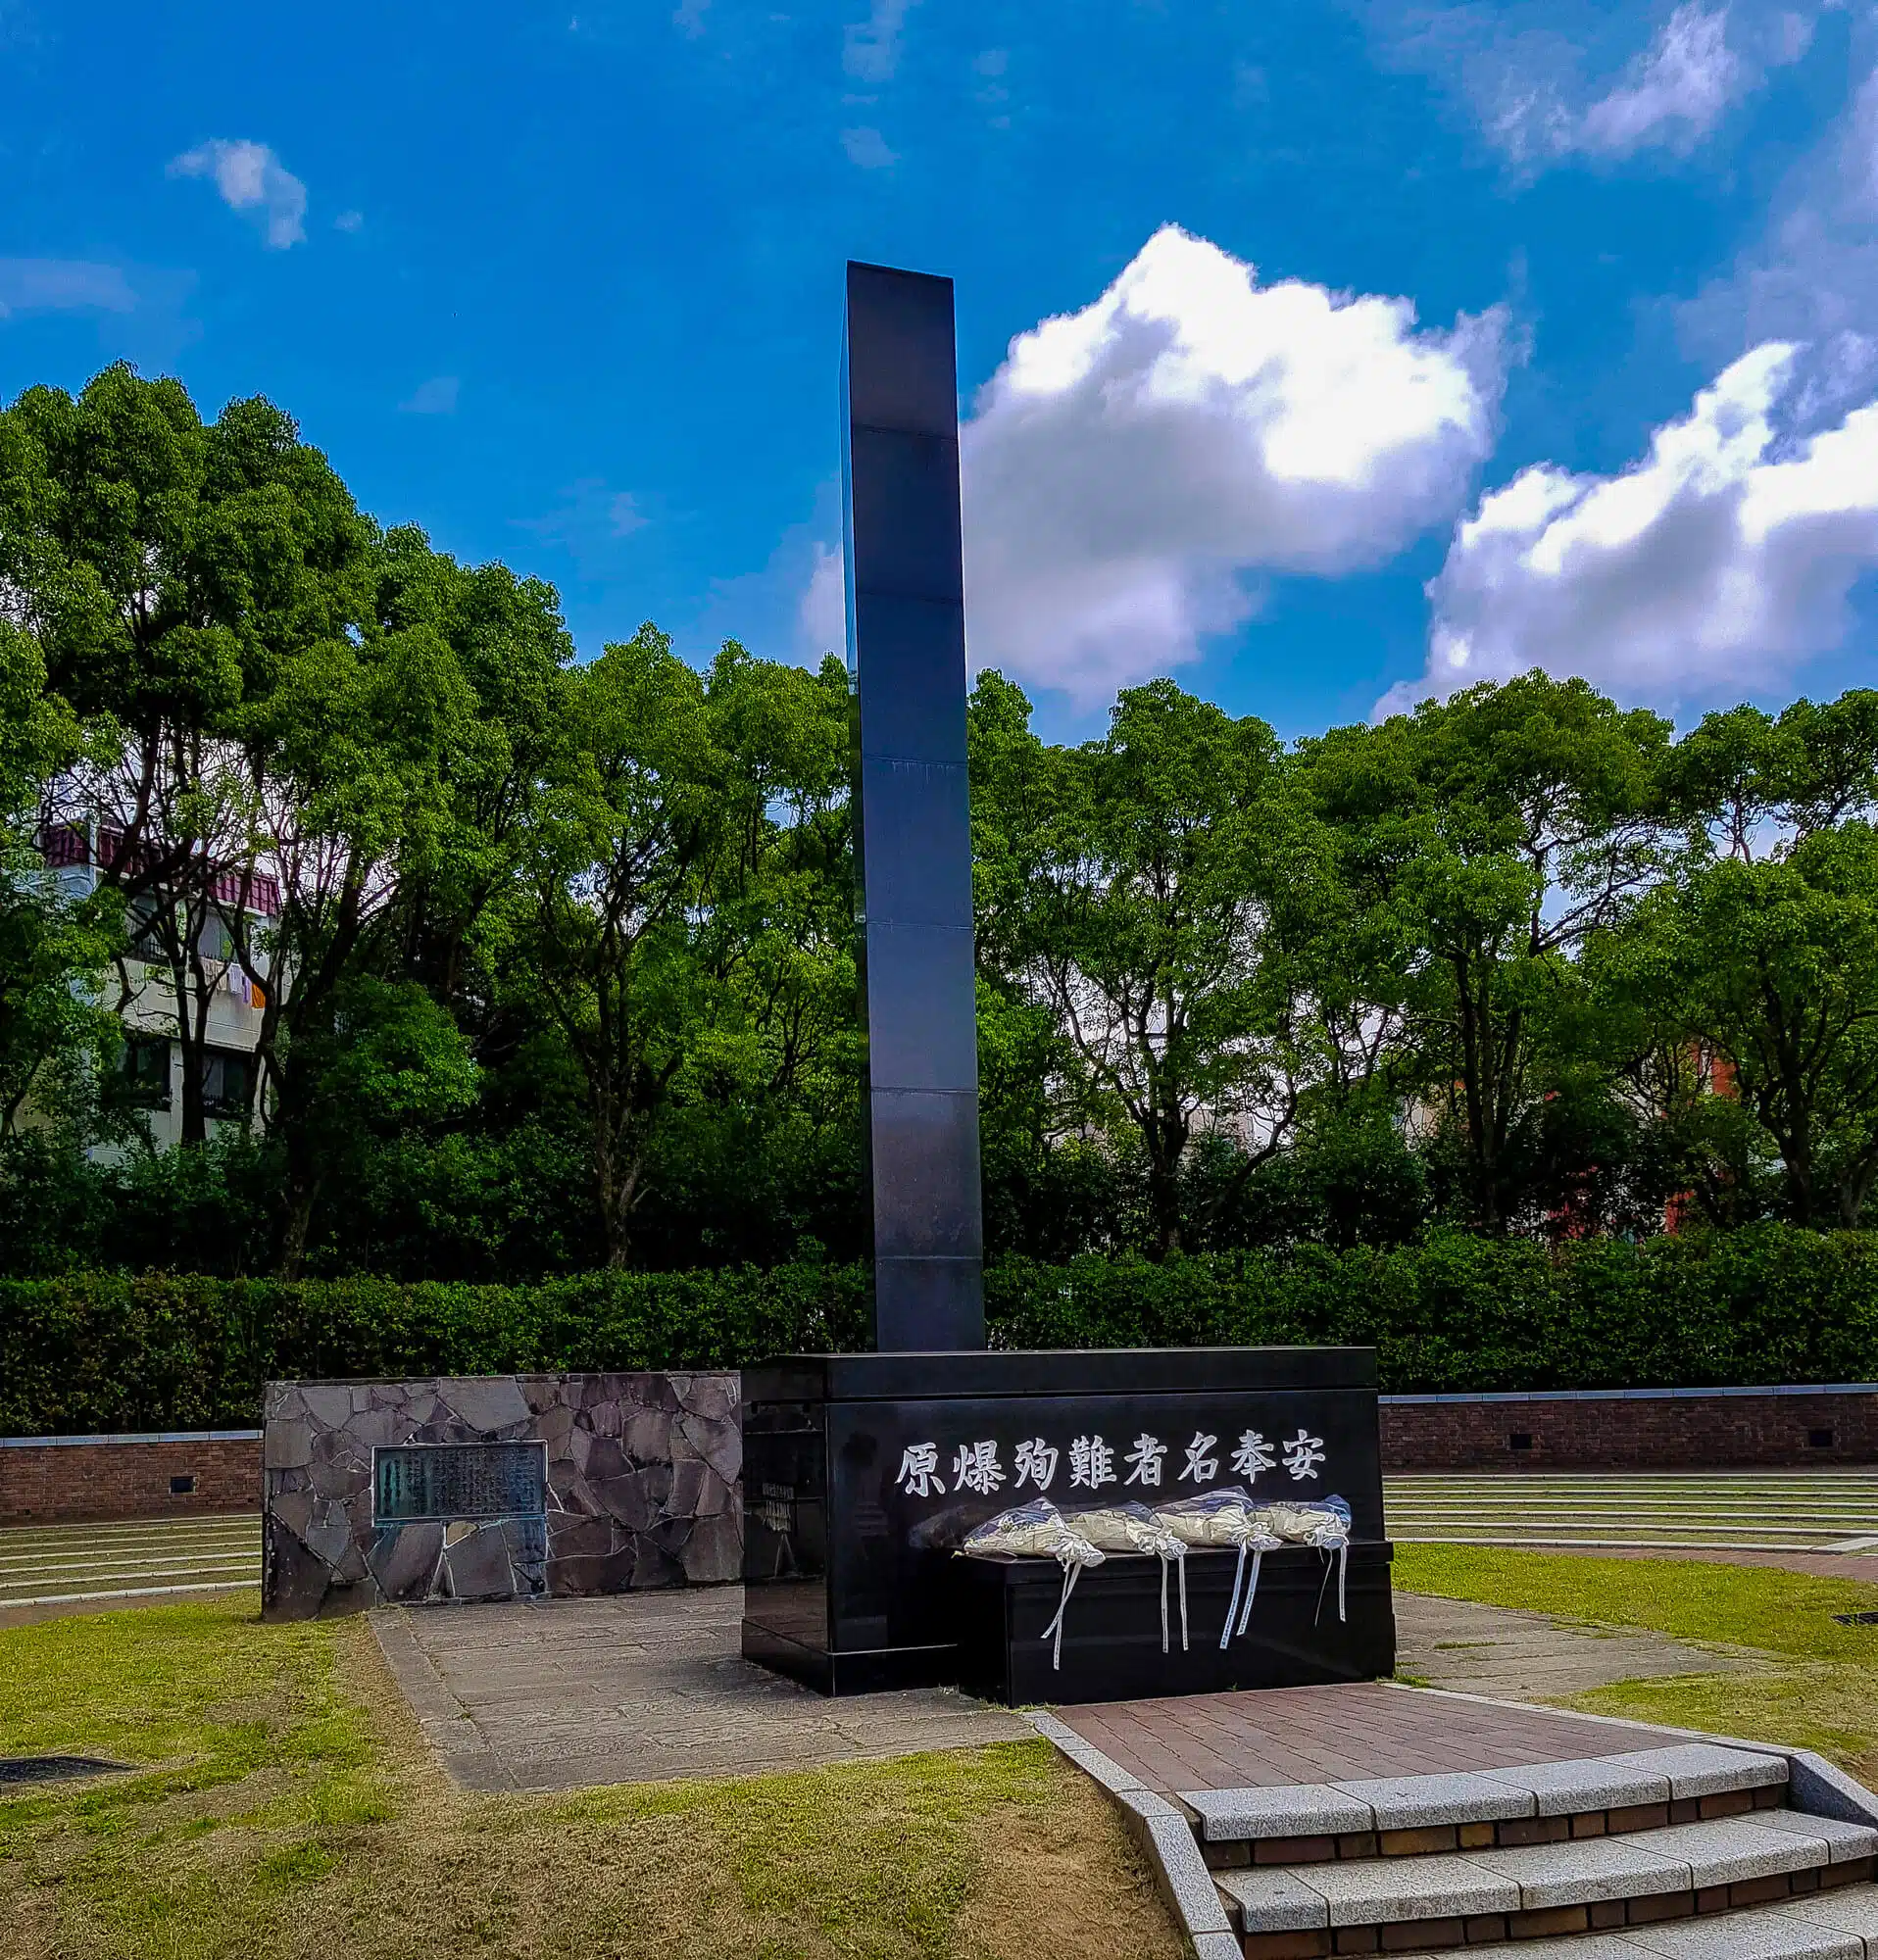 Monument to the victims of the atomic bomb in Nagasaki, Japan. Illustration: depositphotos.com